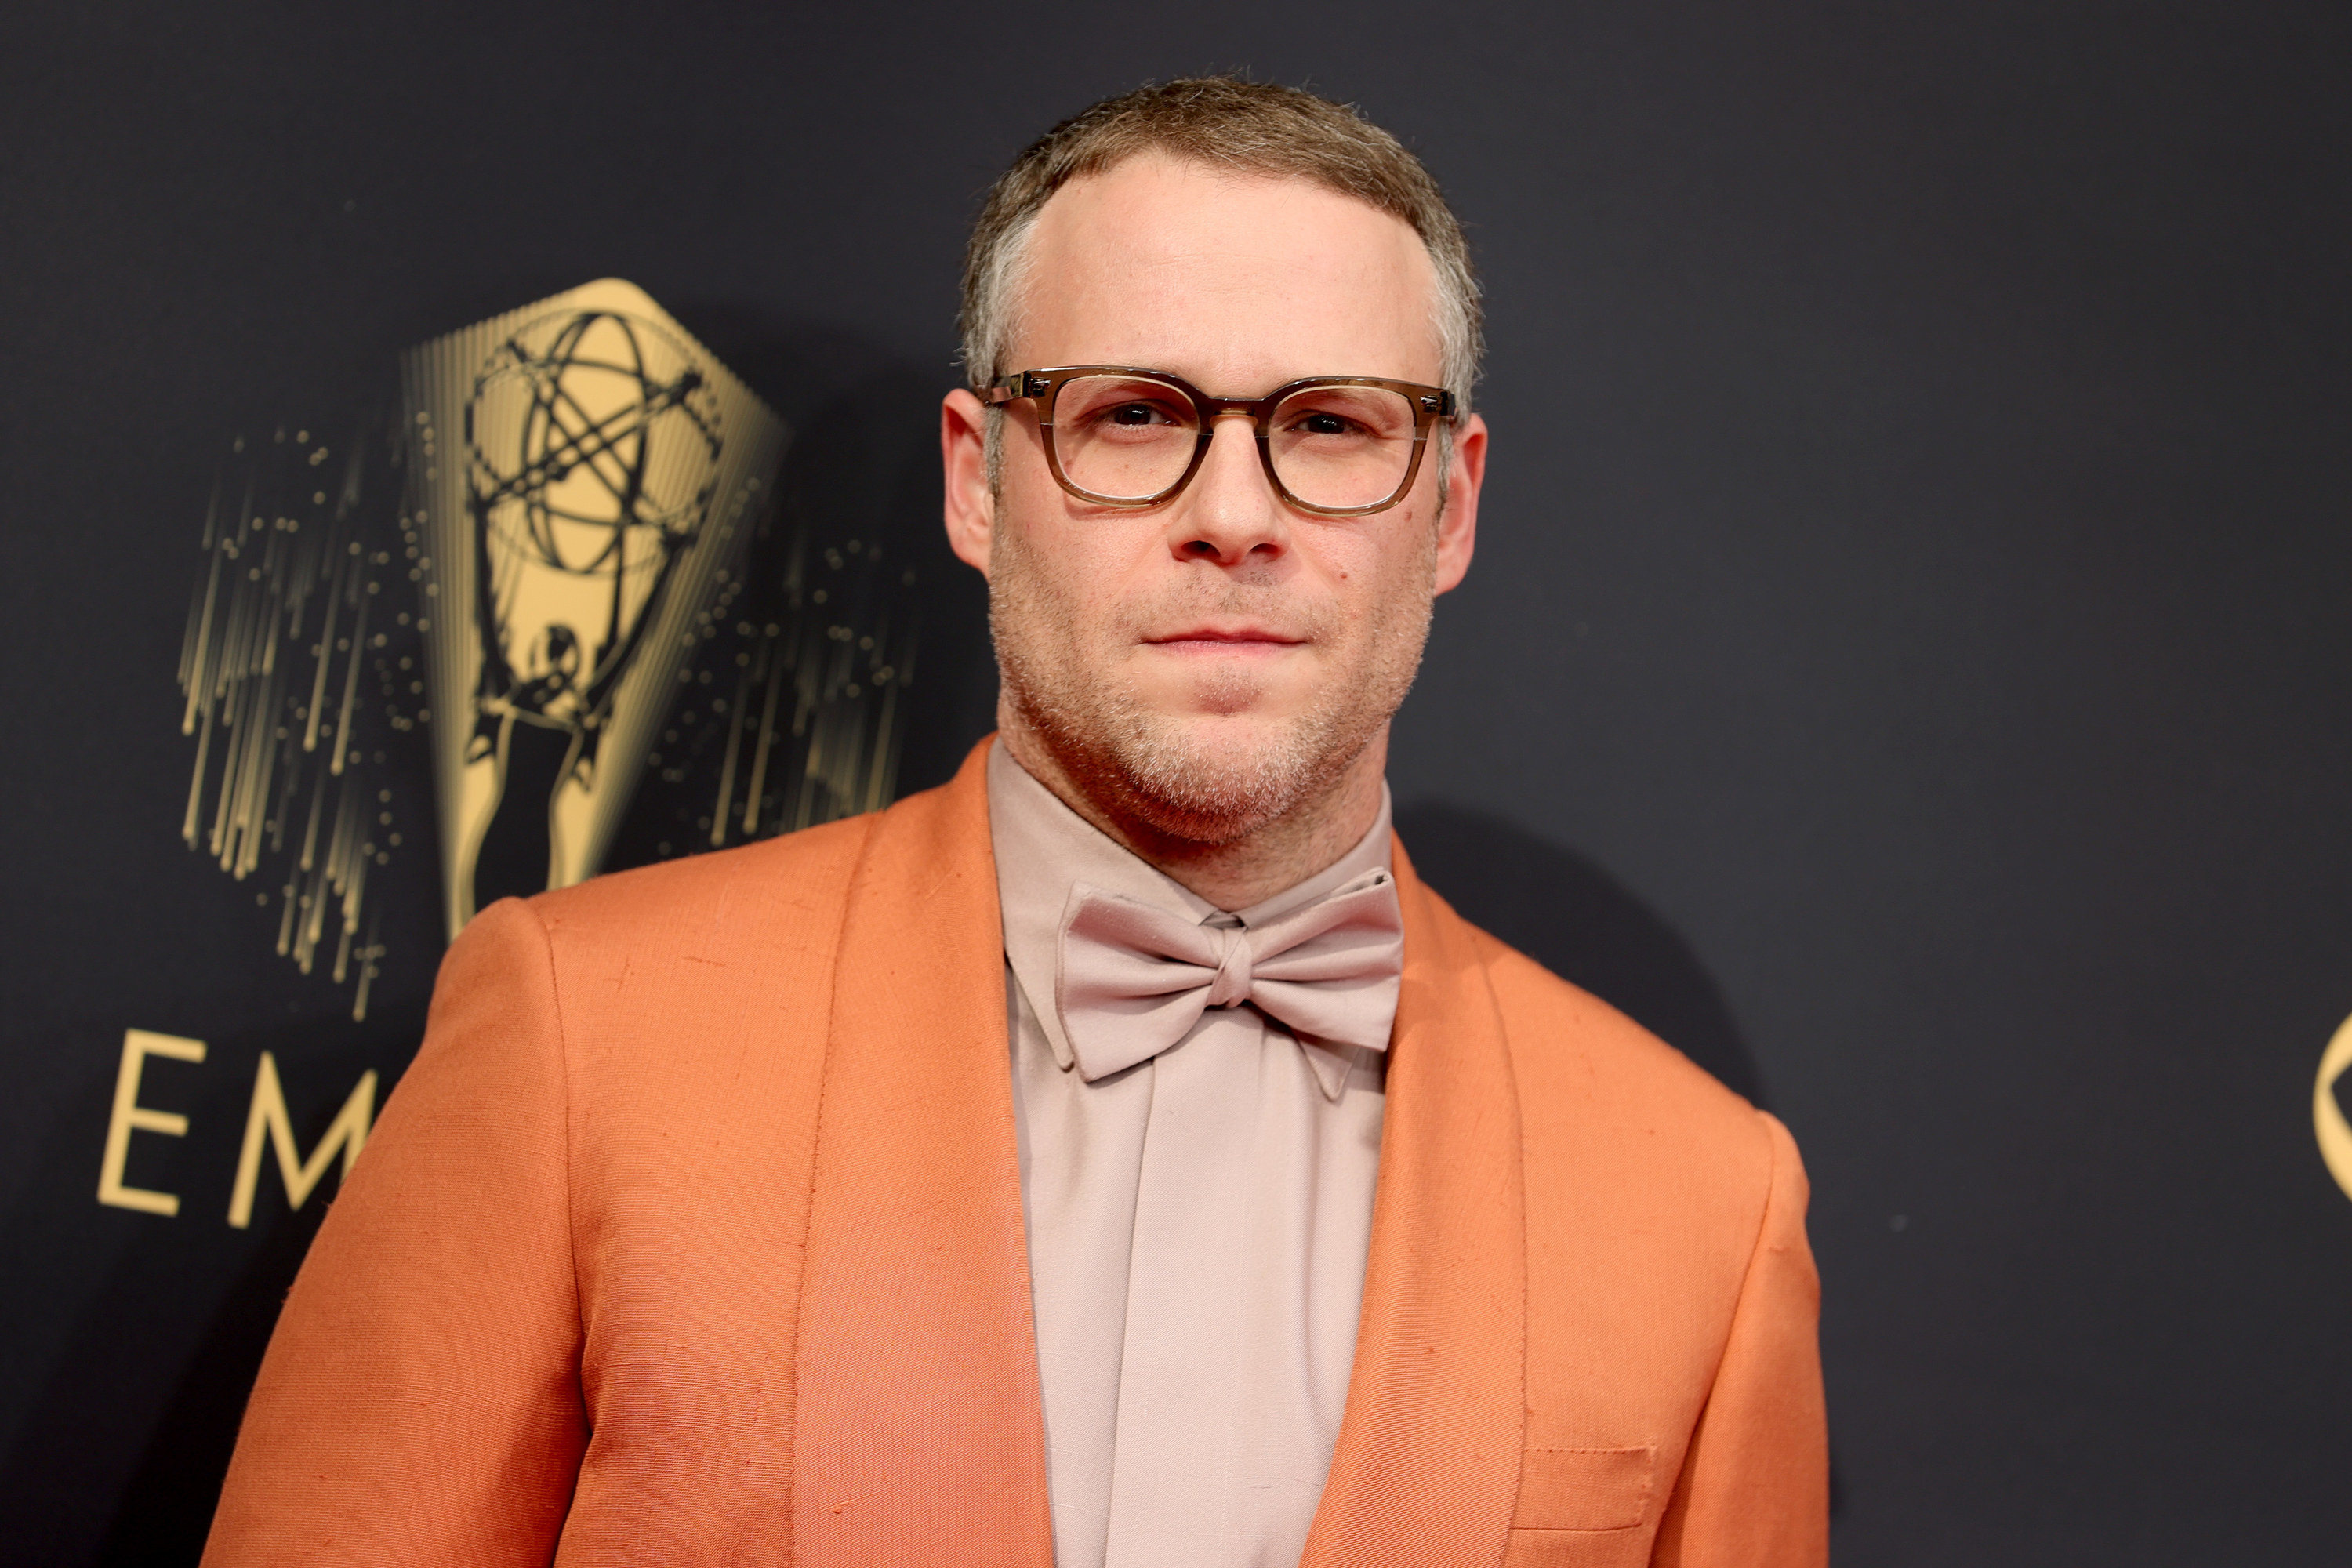 In an orange suit and bow tie at the Emmys